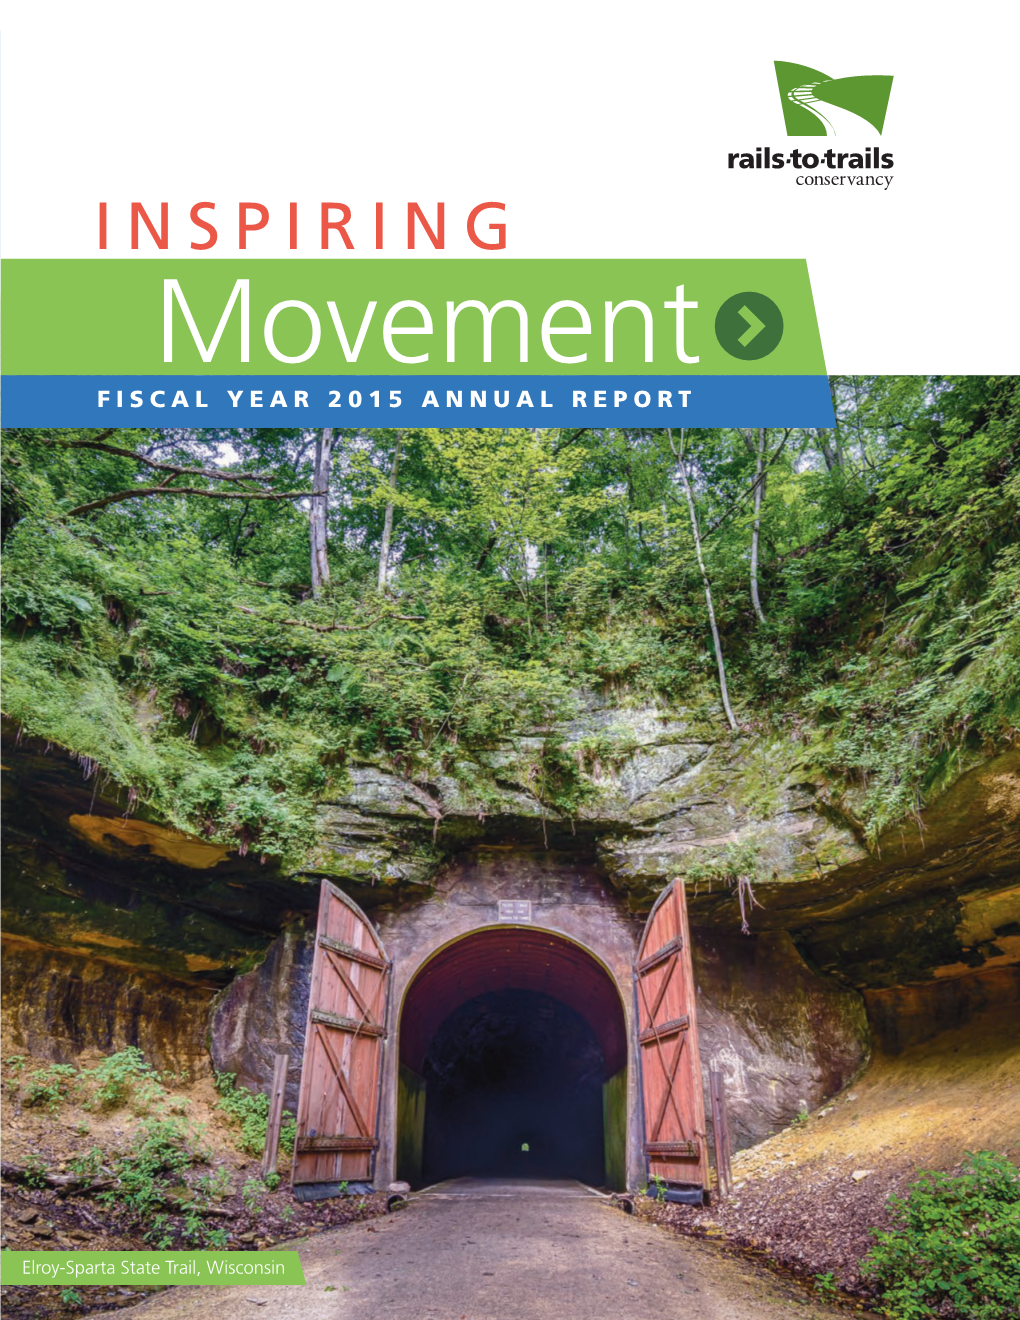 INSPIRING Movement FISCAL YEAR 2015 ANNUAL REPORT